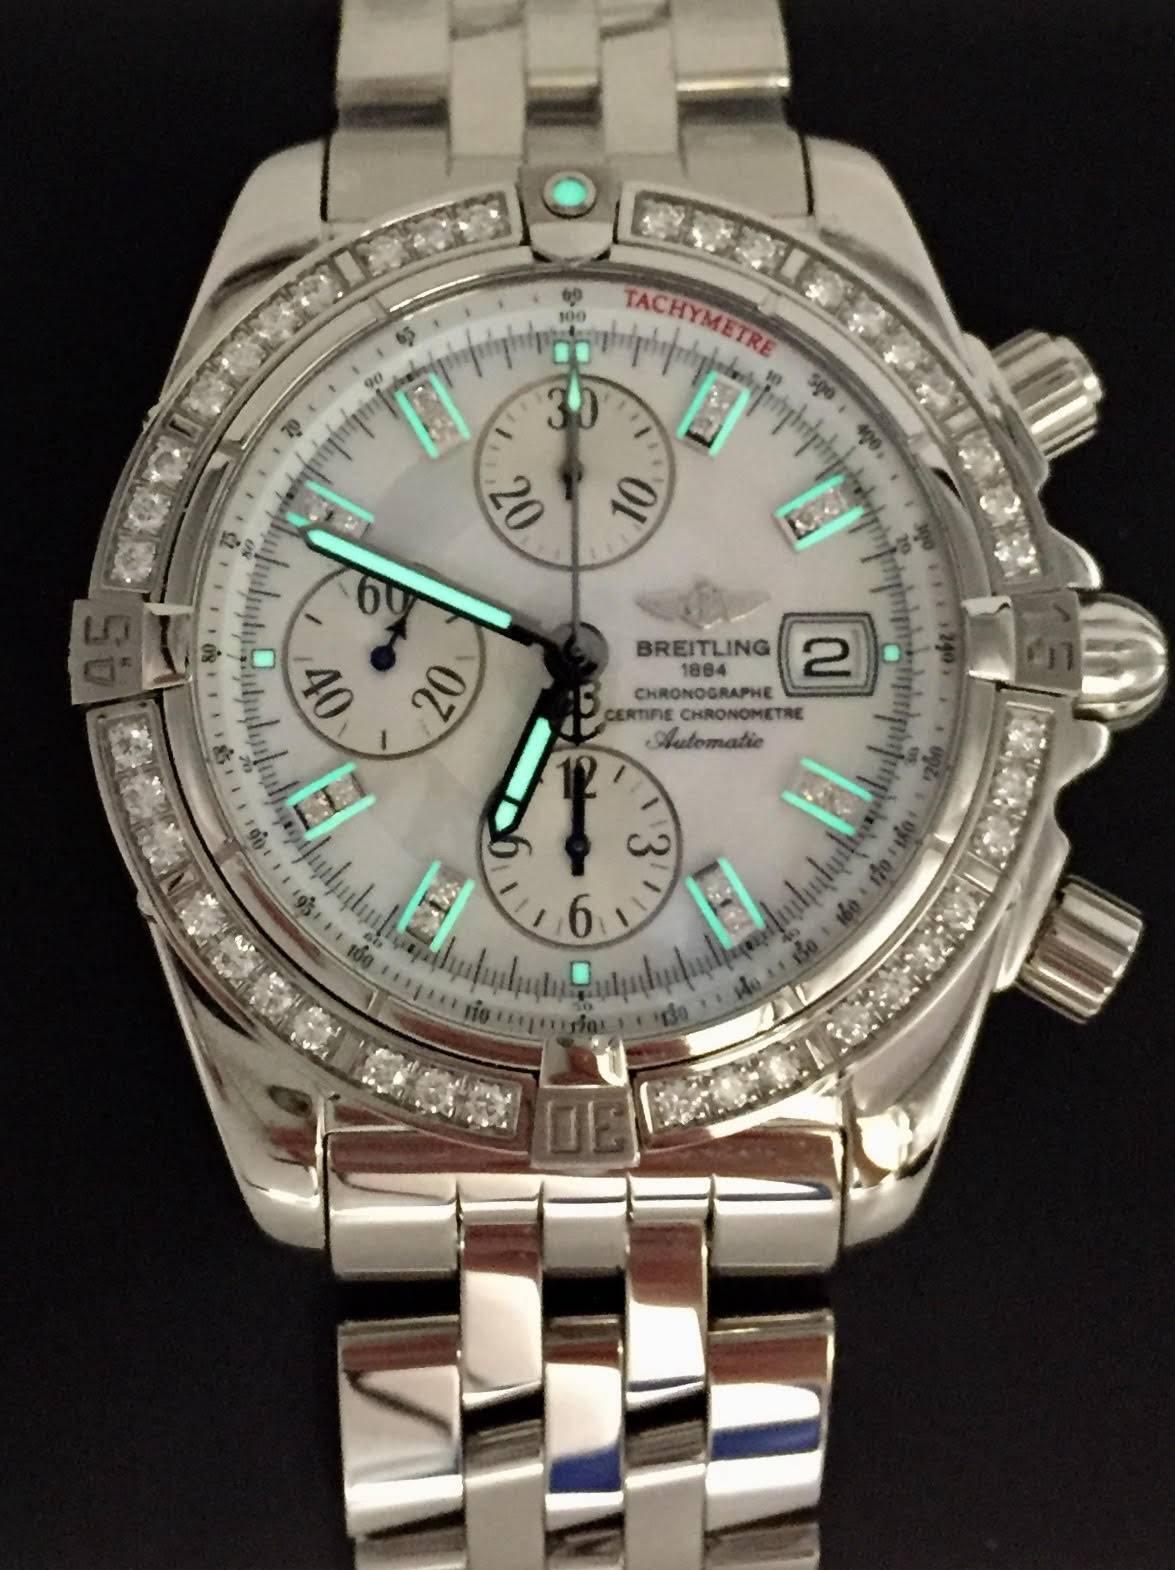 Breitling Stainless Mother-of-Pearl Diamond Evolution Chronometre Wristwatch 3